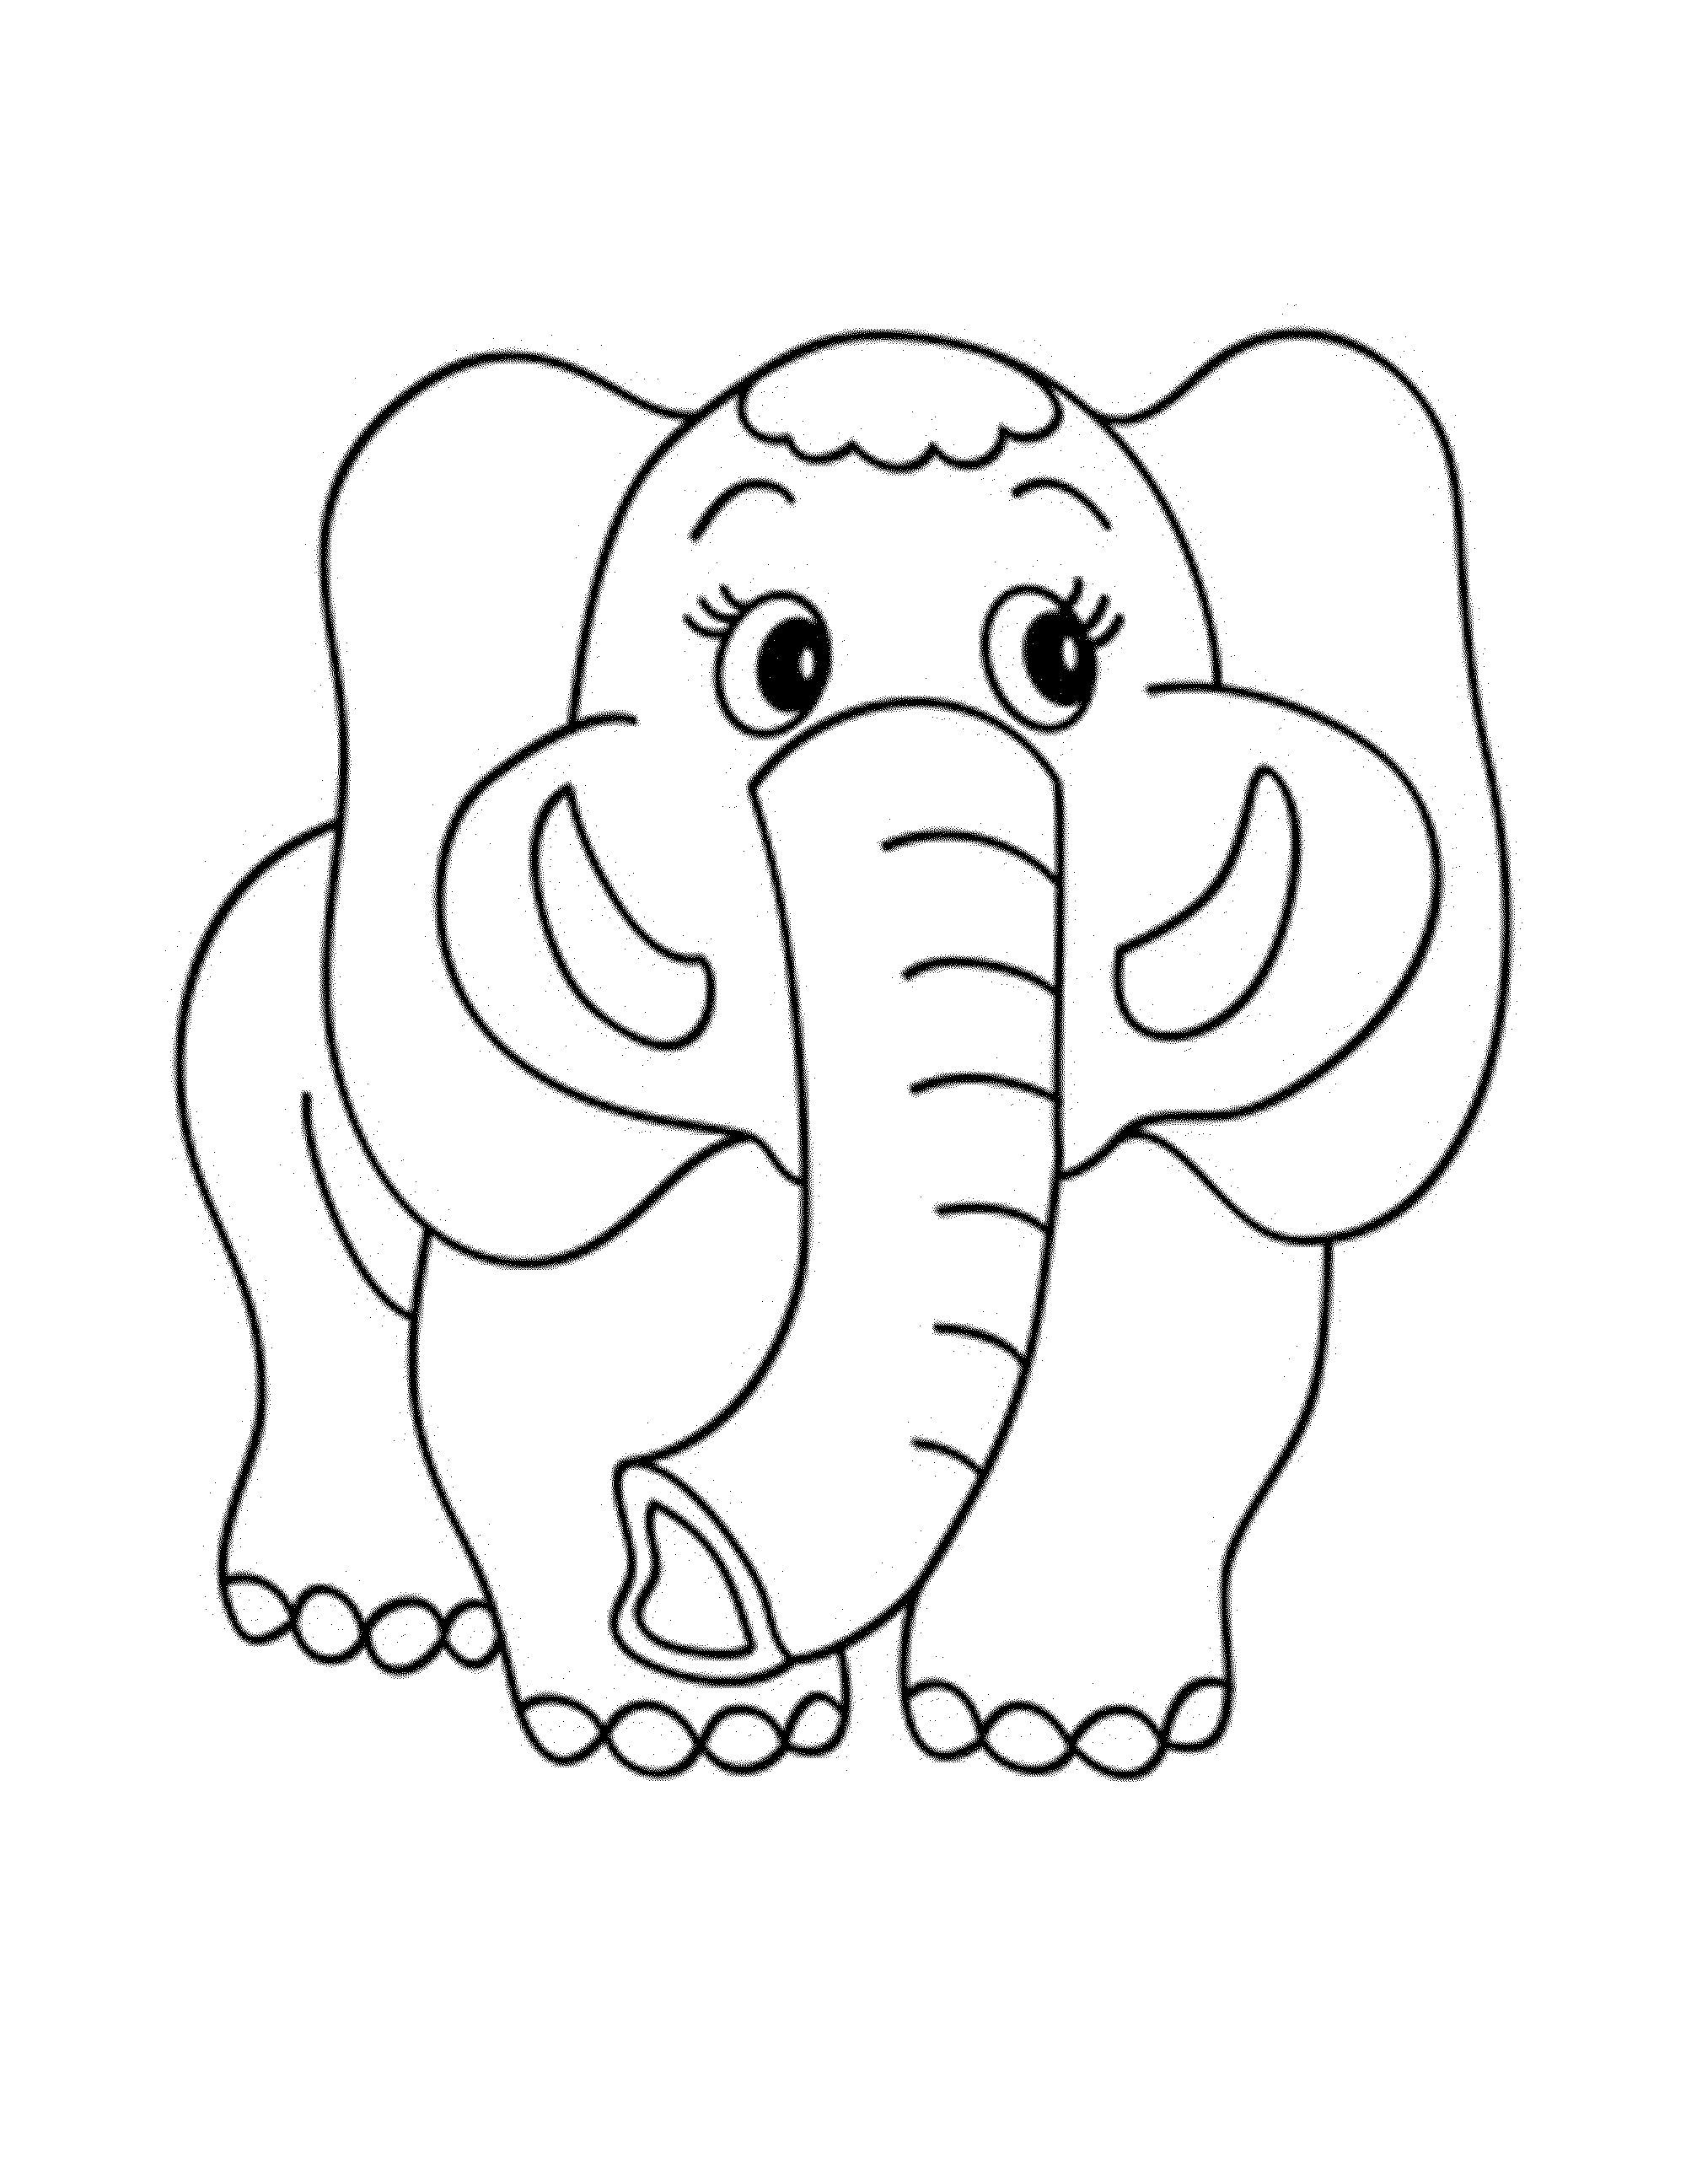 Cute Animals With Big Eyes Coloring Pages at GetColorings.com   Free ...